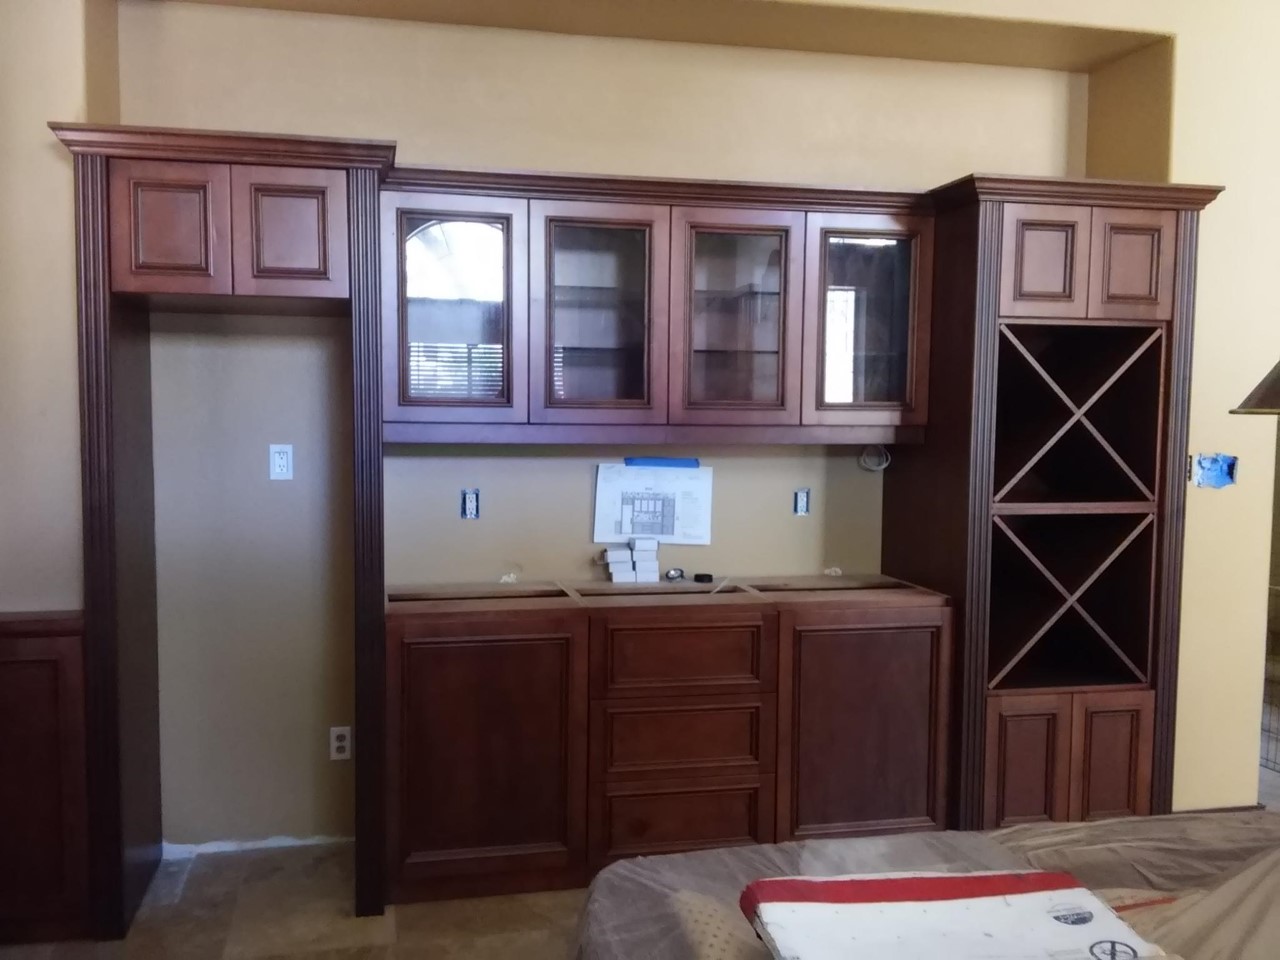 A kitchen with wooden cabinets and wine racks.